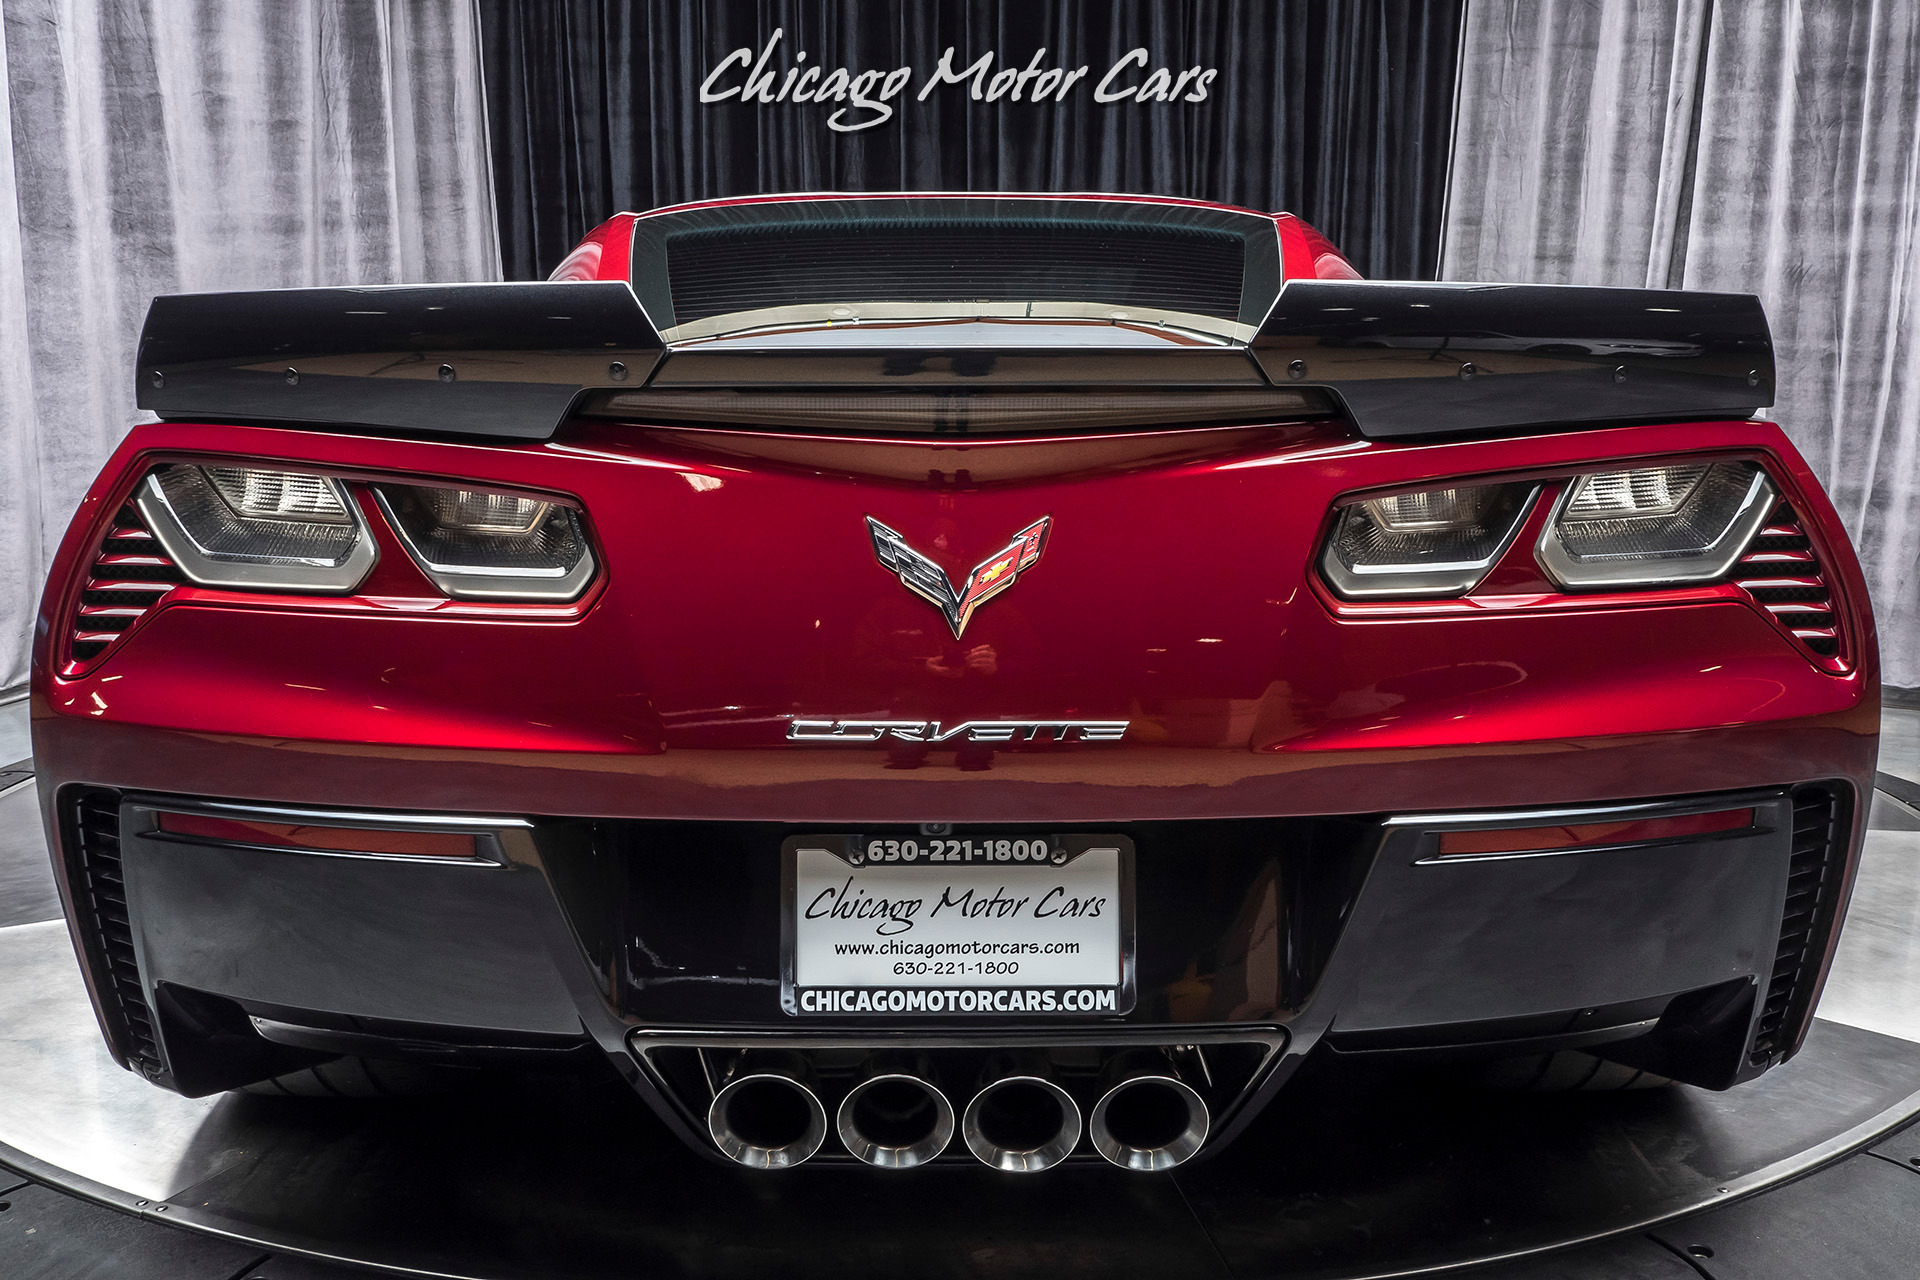 Used-2016-Chevrolet-Corvette-Z06-3LZ-Z07-Coupe-MSRP-112K-LOADED-Extremely-Well-Equipped